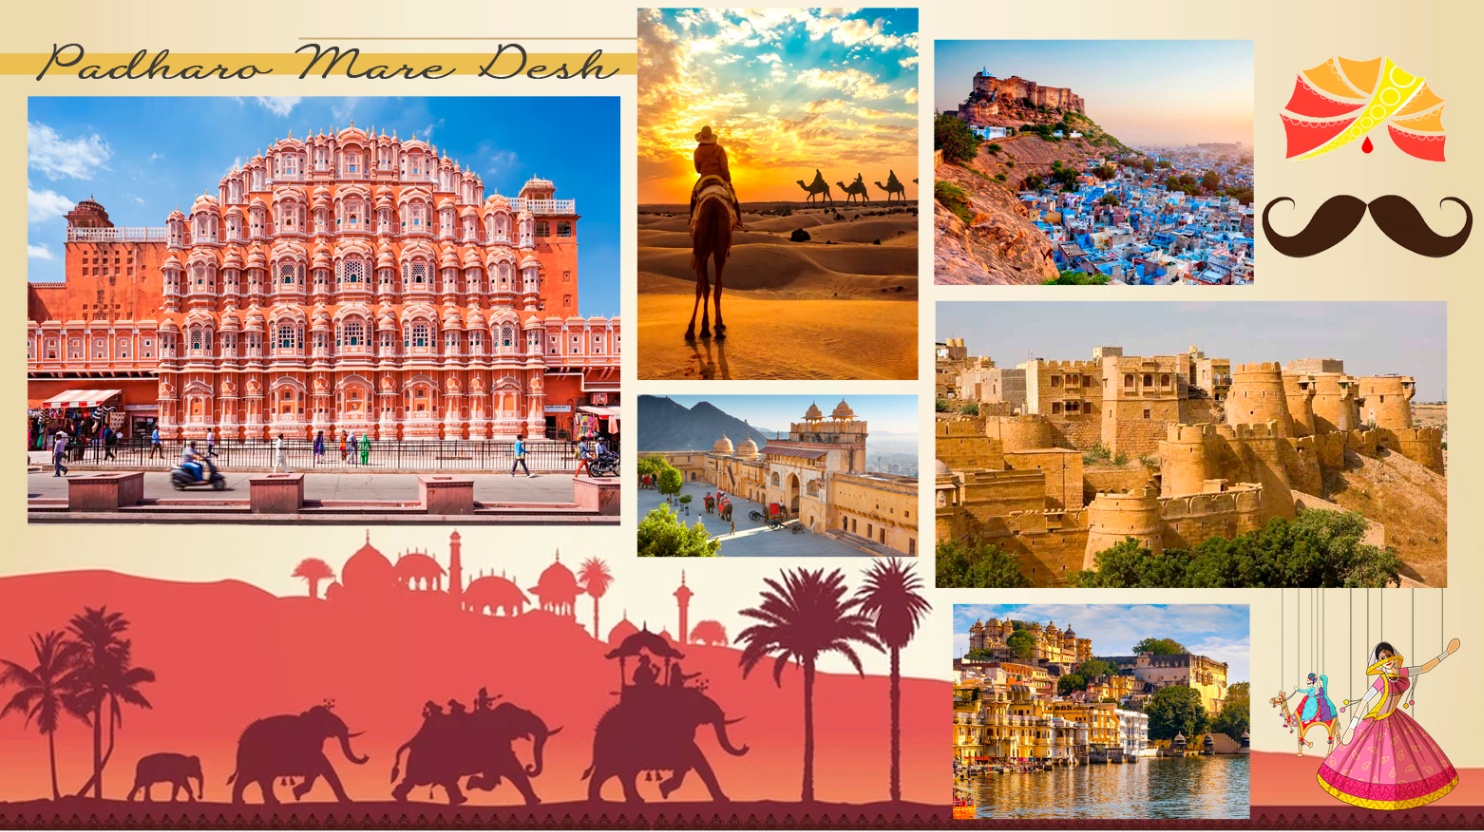 Rajasthan Tour Packages from Hyderabad-My Rajasthan Trip